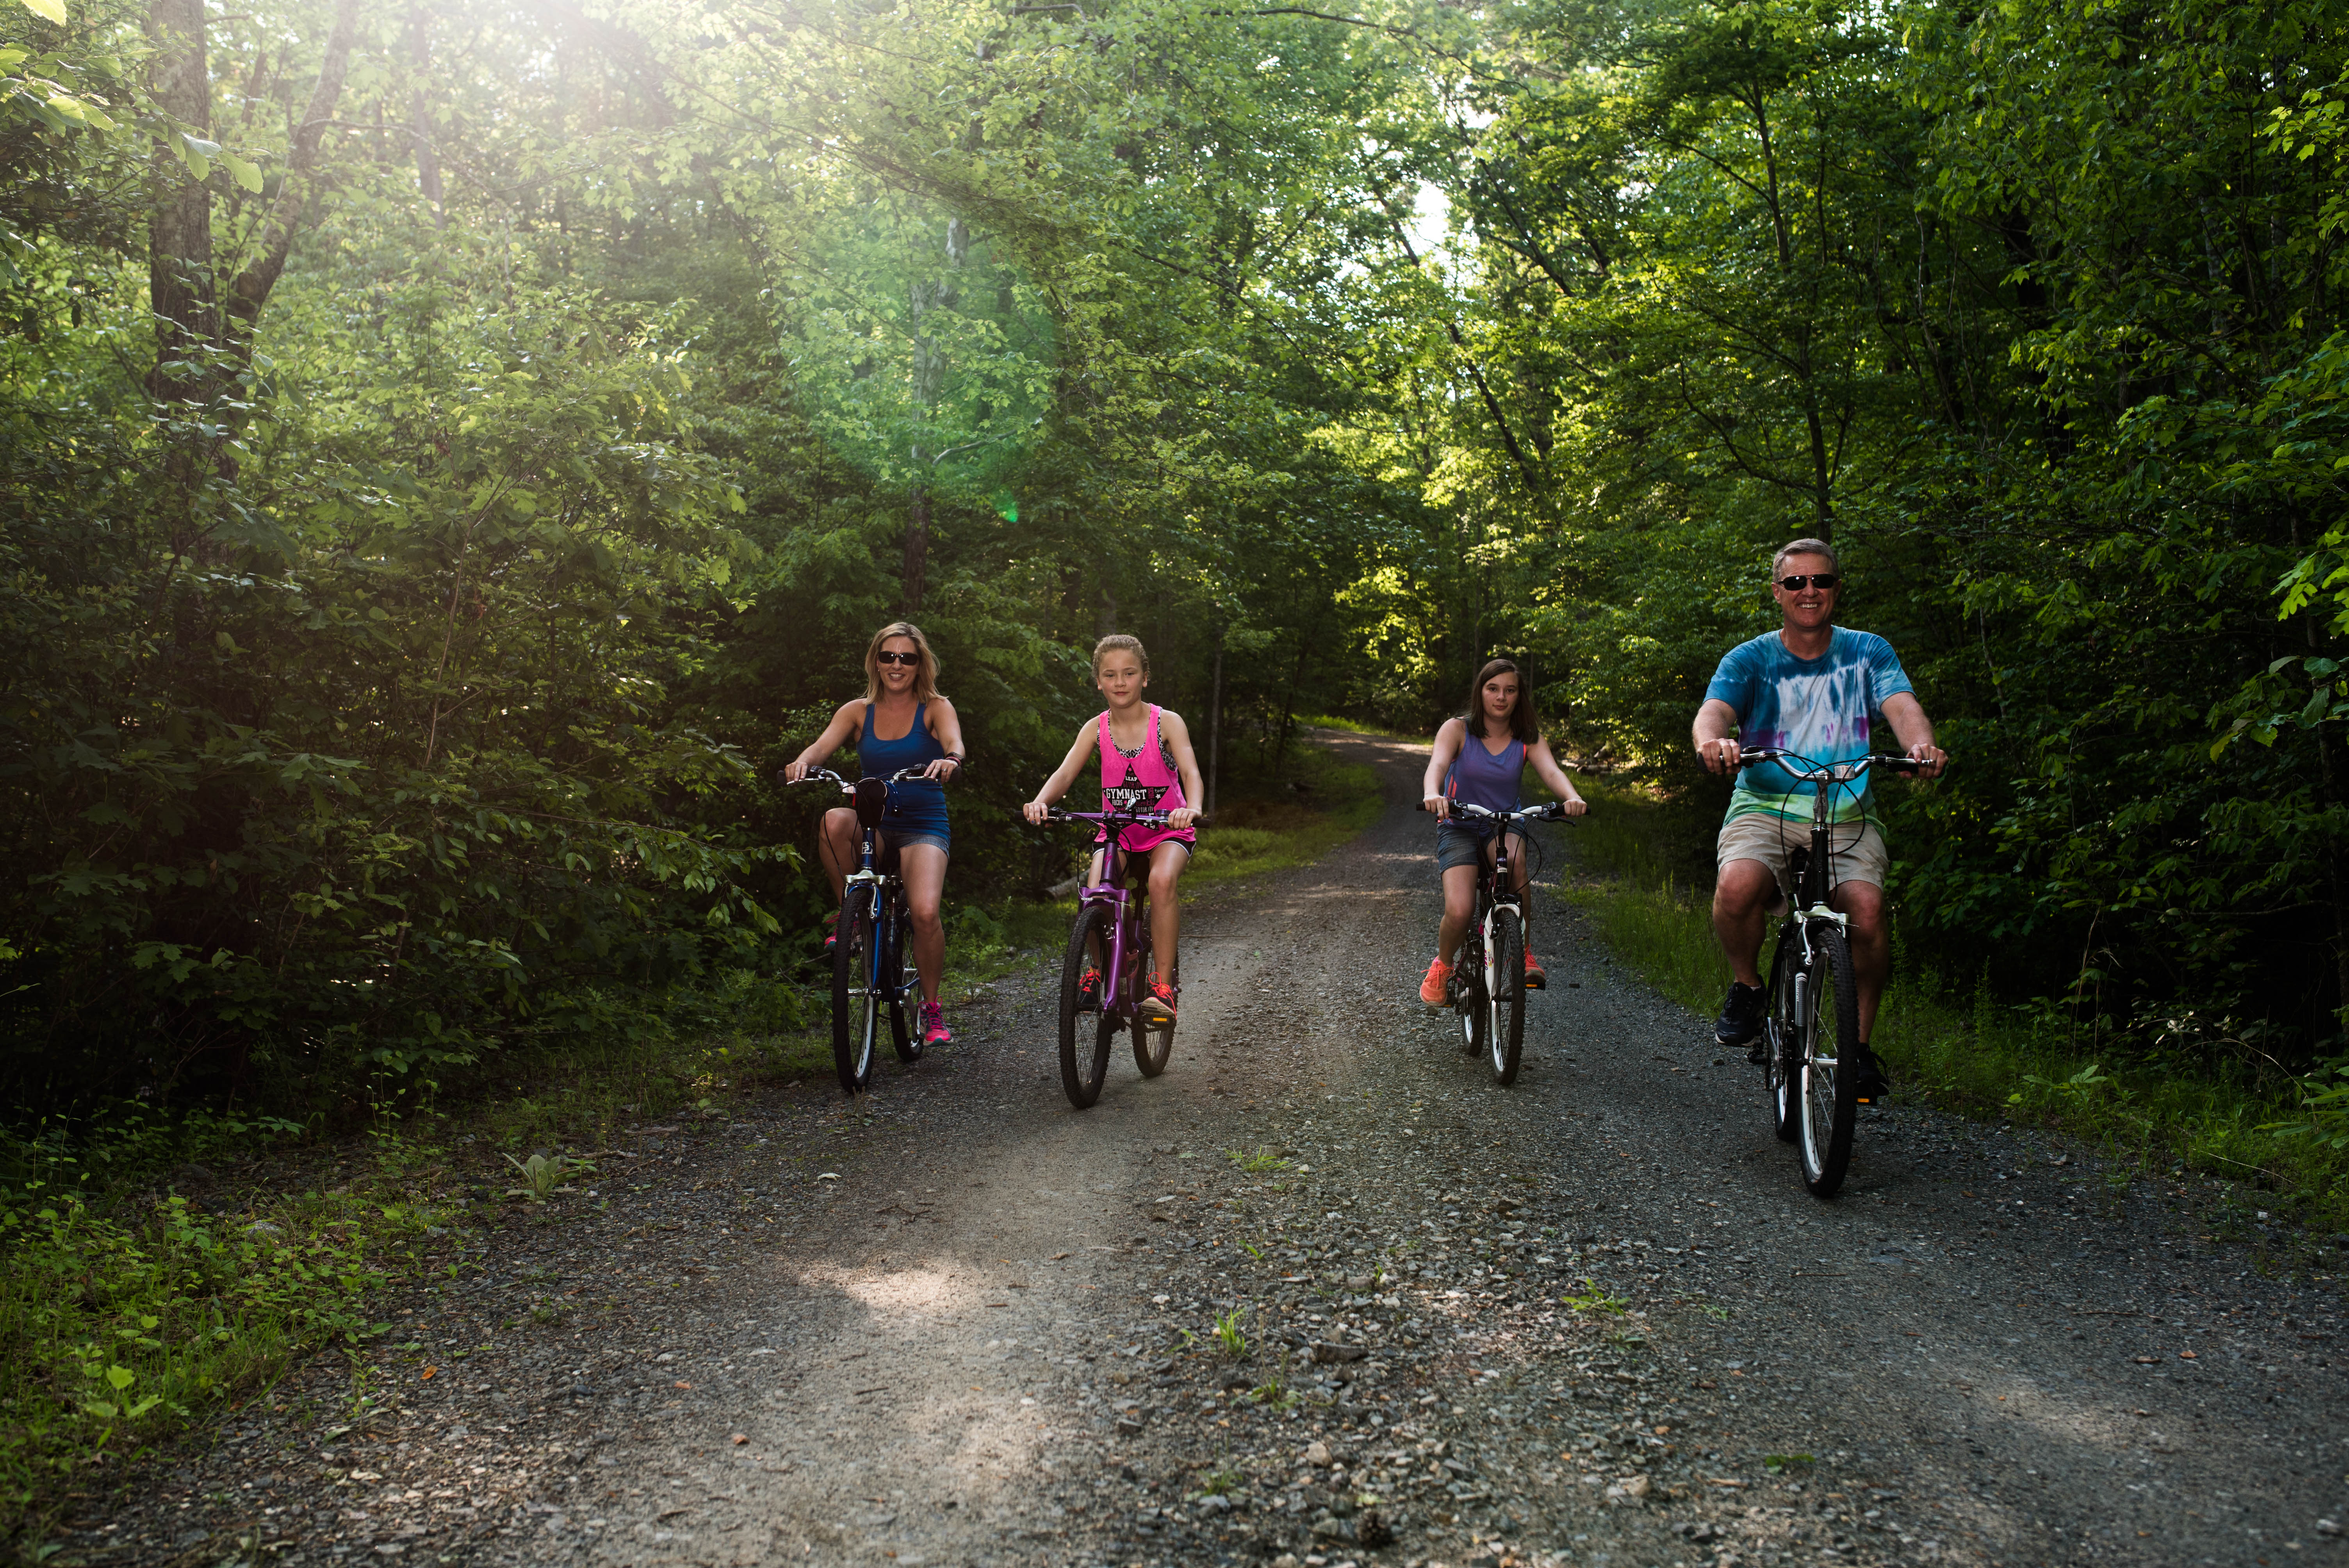 A family riding their bikes on a path in the forest